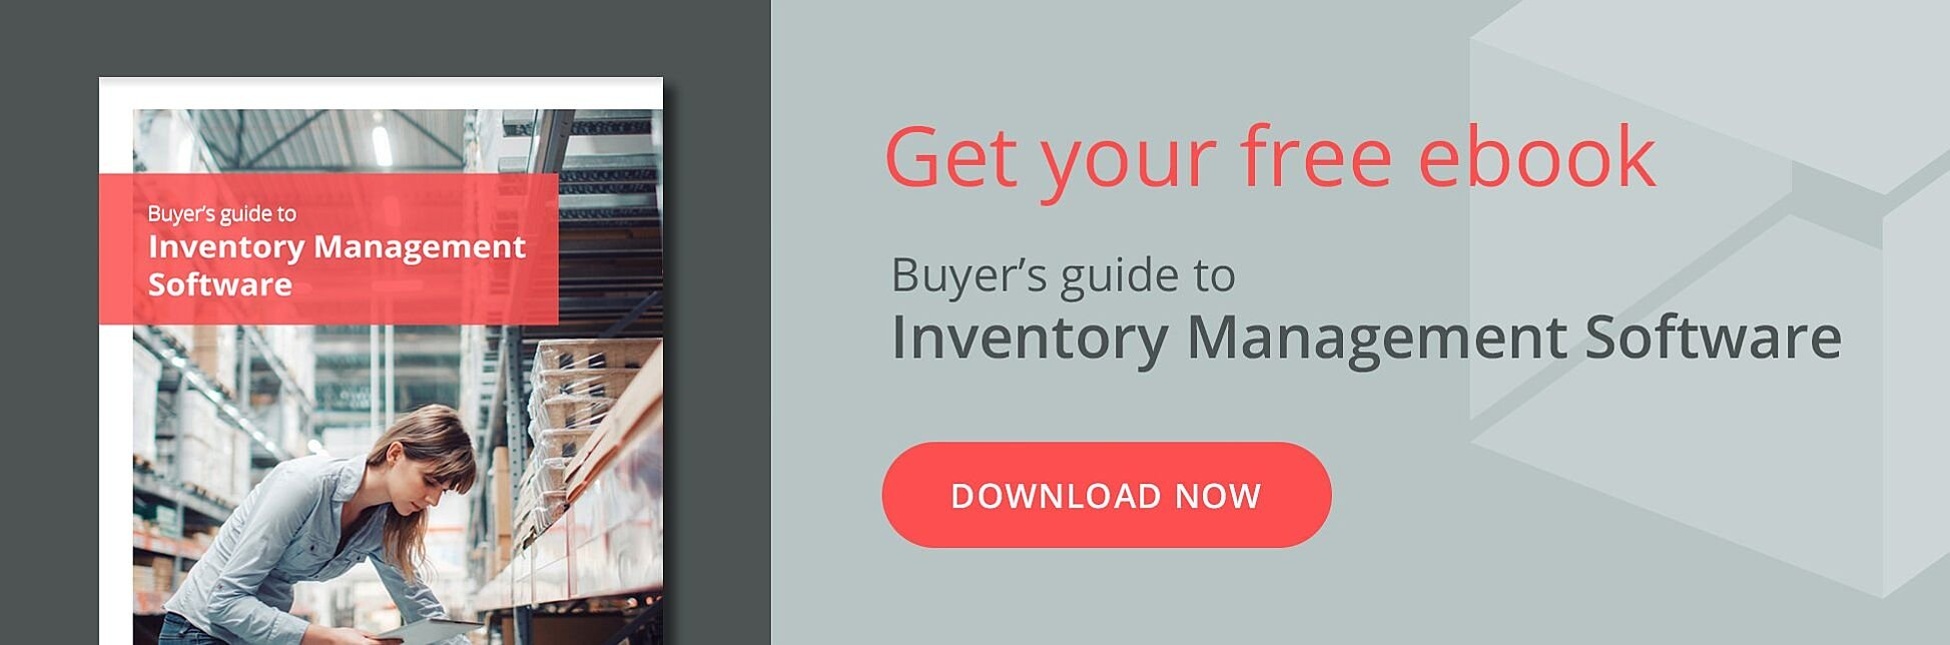 Unleashed Software - Free ebook download - Buyer's guide to Inventory Management Software